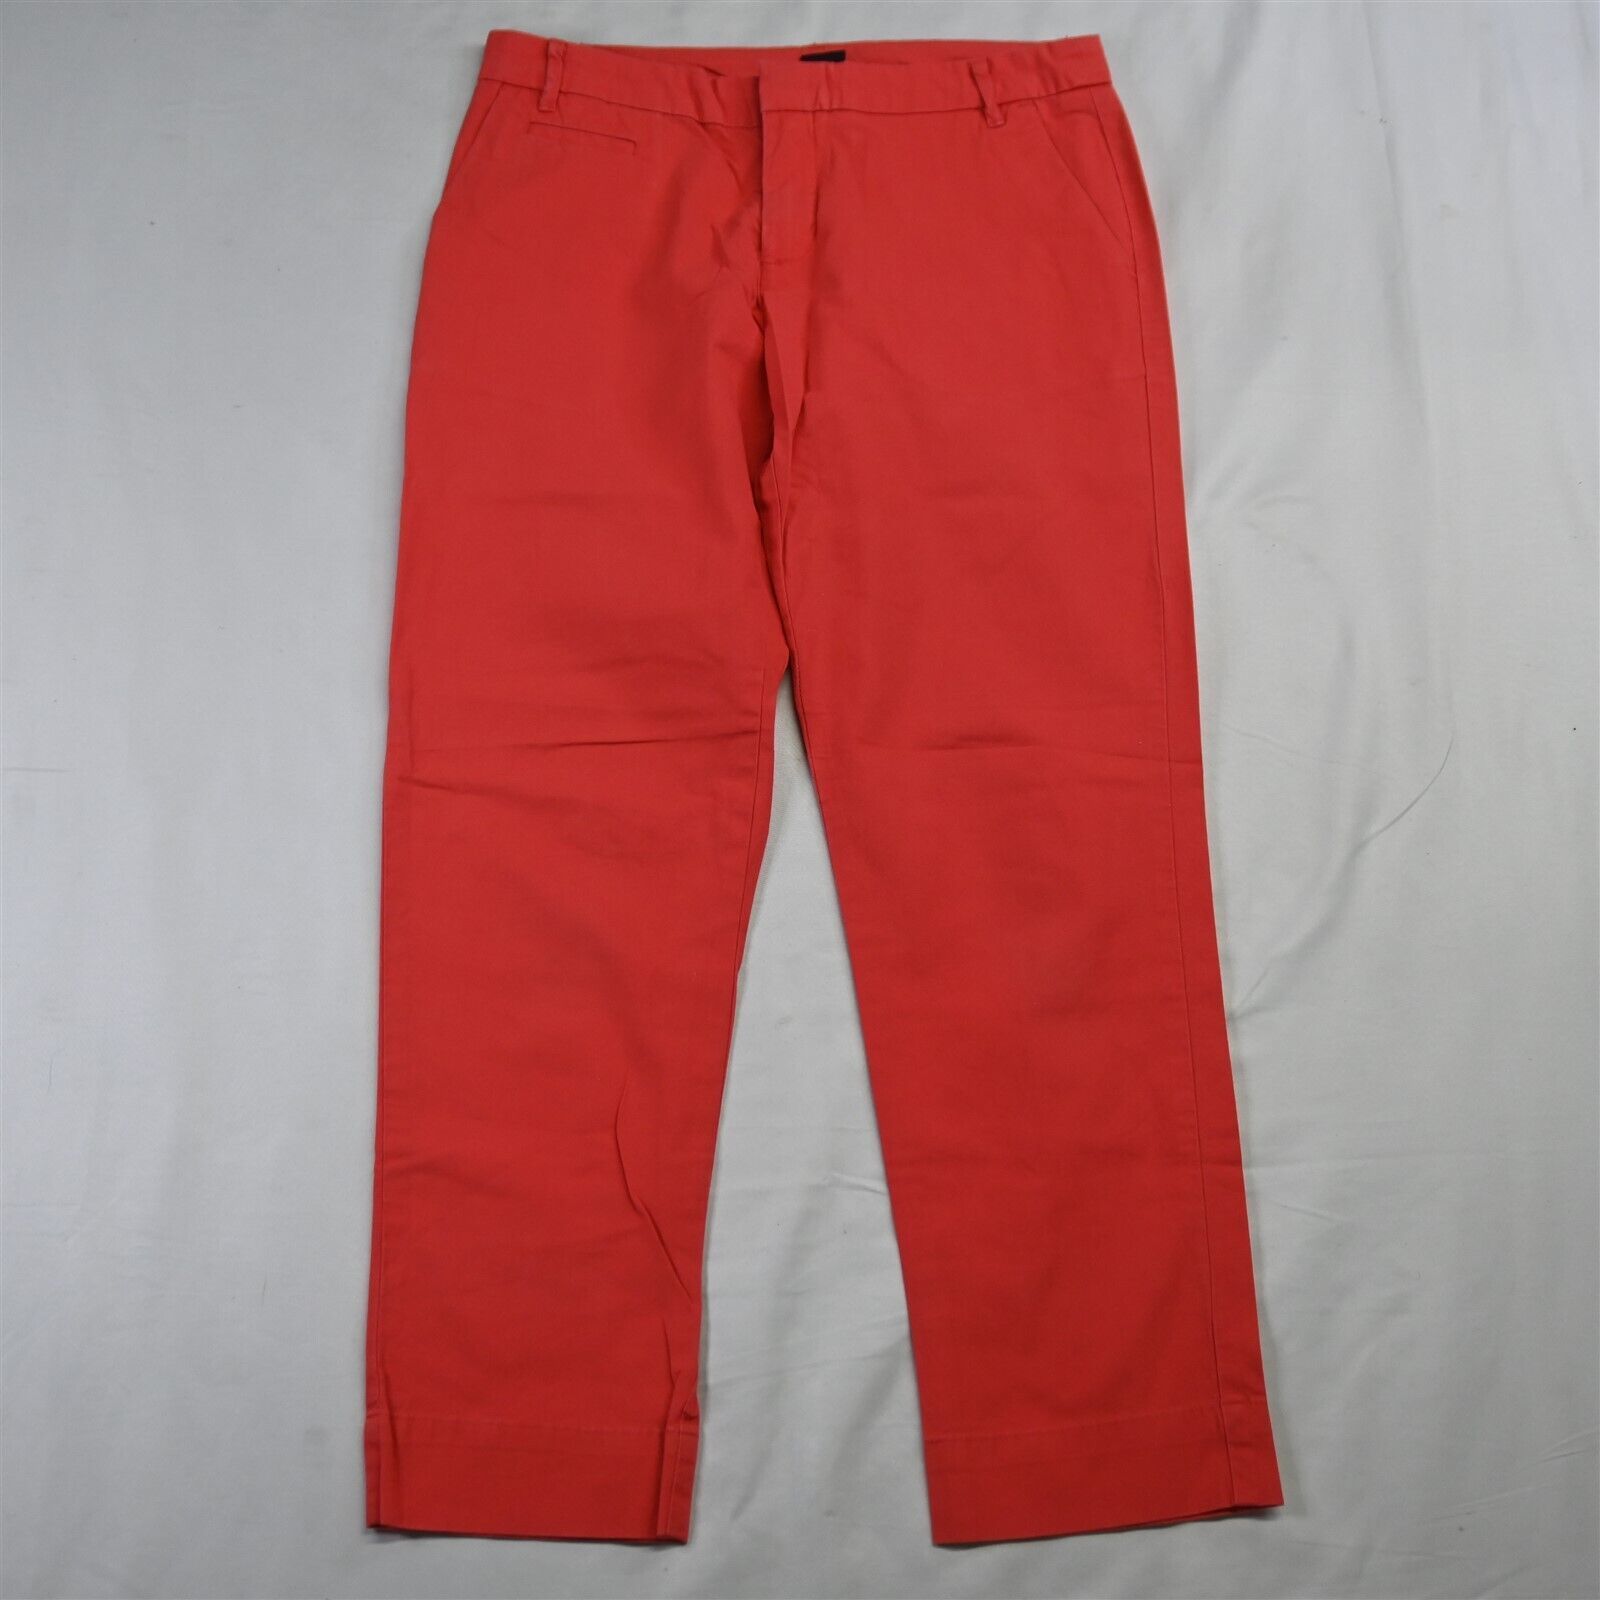 Primary image for Patagonia 6 Bright Red 55395 All Wear Capris Stretch Womens Chino Pants